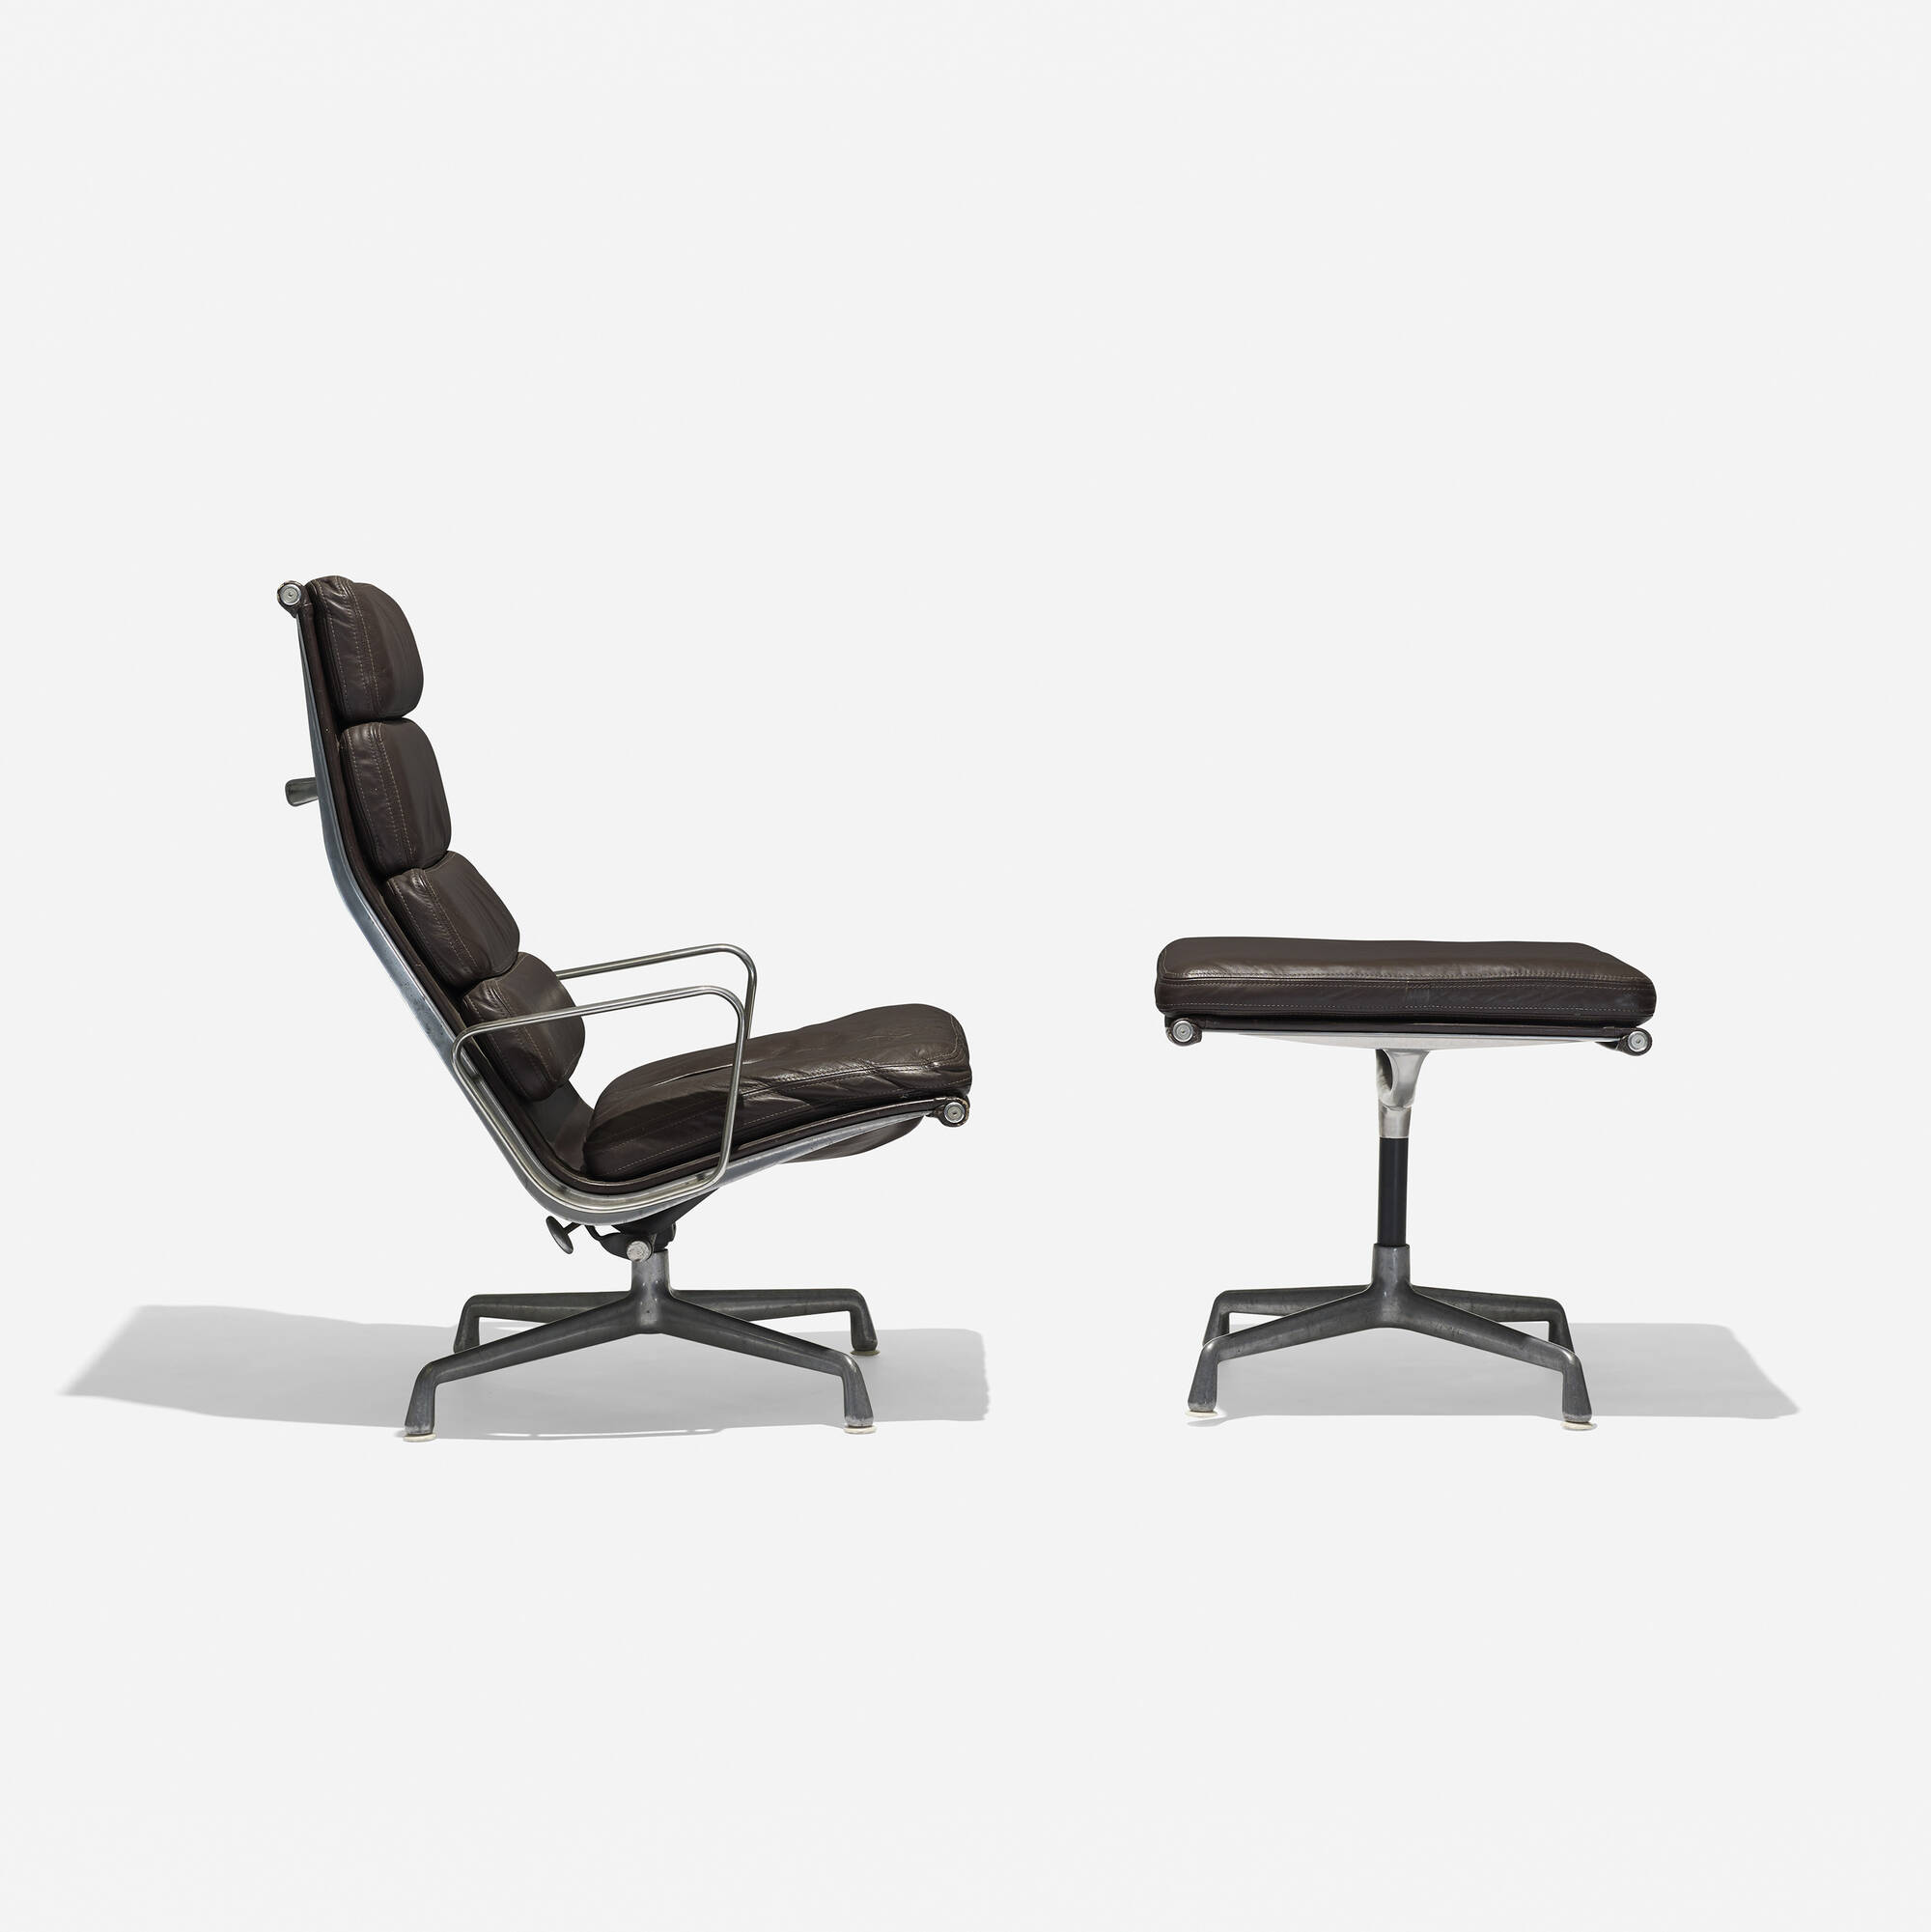 262: CHARLES AND RAY EAMES, Soft Pad lounge chair and ottoman